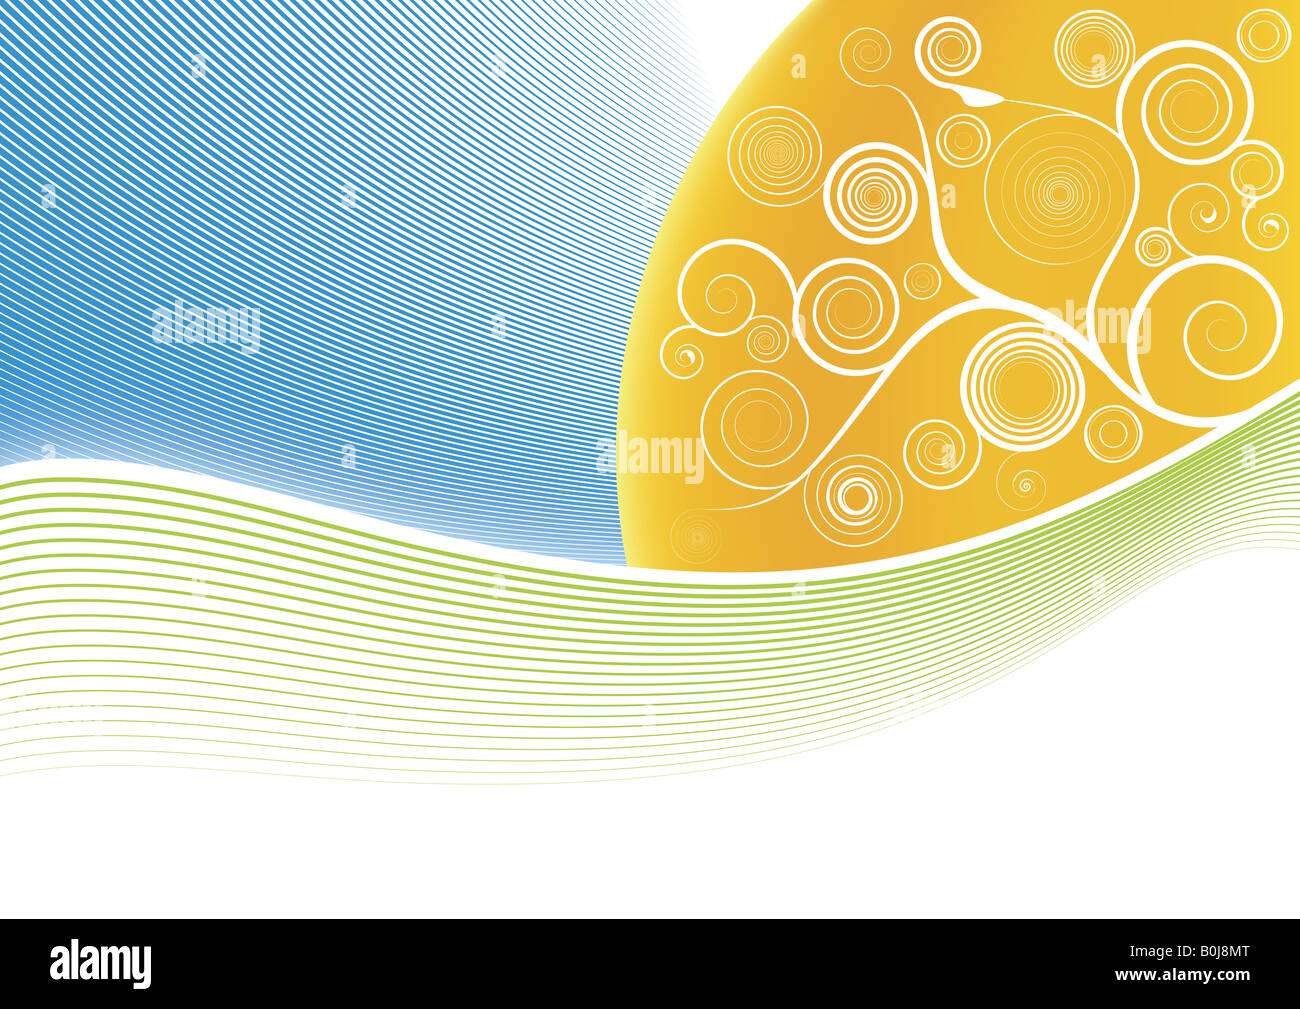 Vector illustration of a gradient mesh sun with modern floral spirals and lined art style waves Copy space for design elements Stock Photo